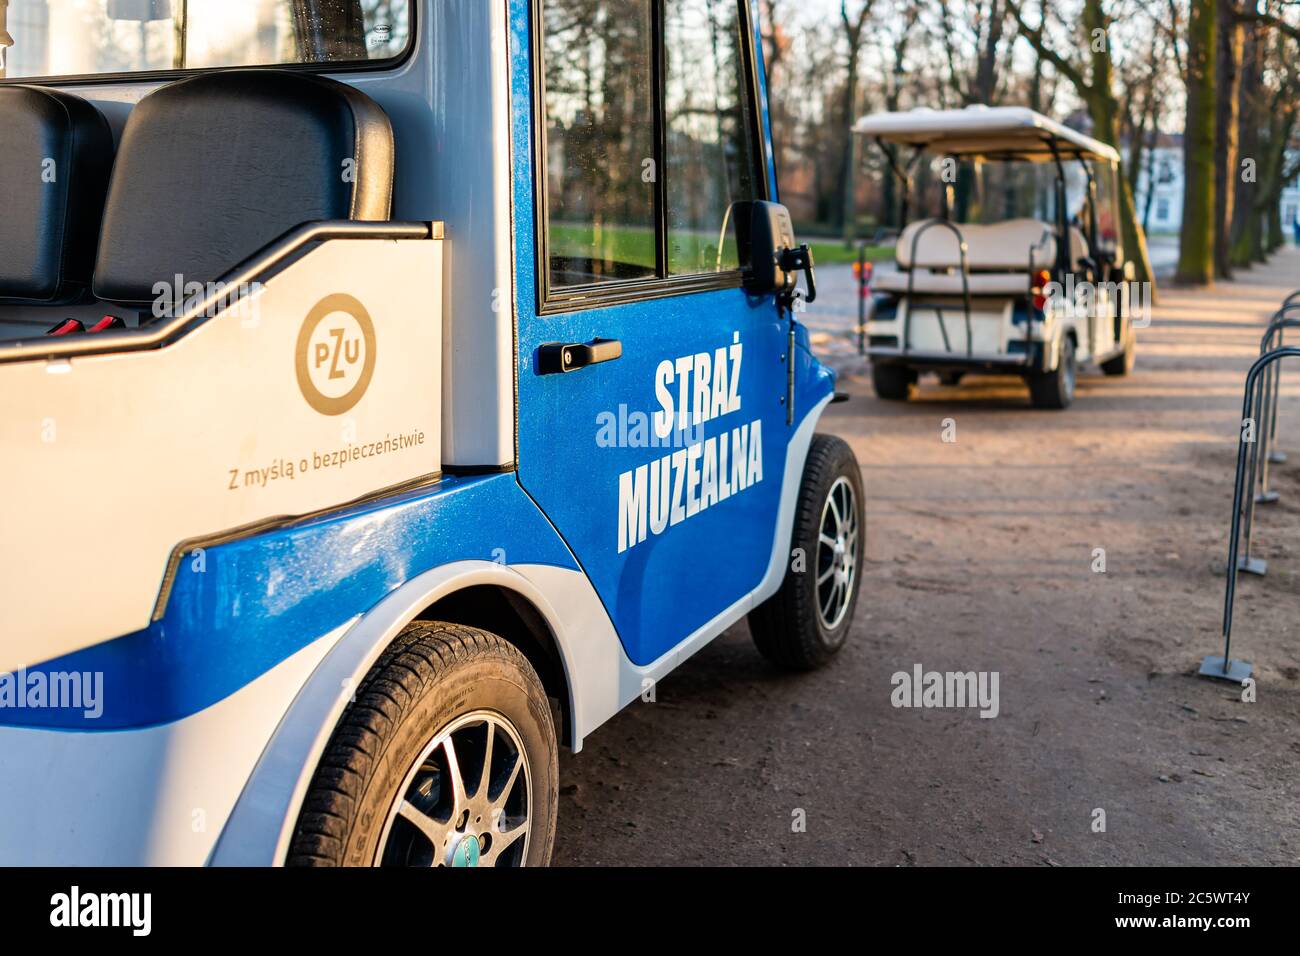 Warsaw, Poland - December 20, 2019: Warszawa Lazienki or Royal Baths Park with museum guards security golf carts cars sign blue color and nobody Stock Photo